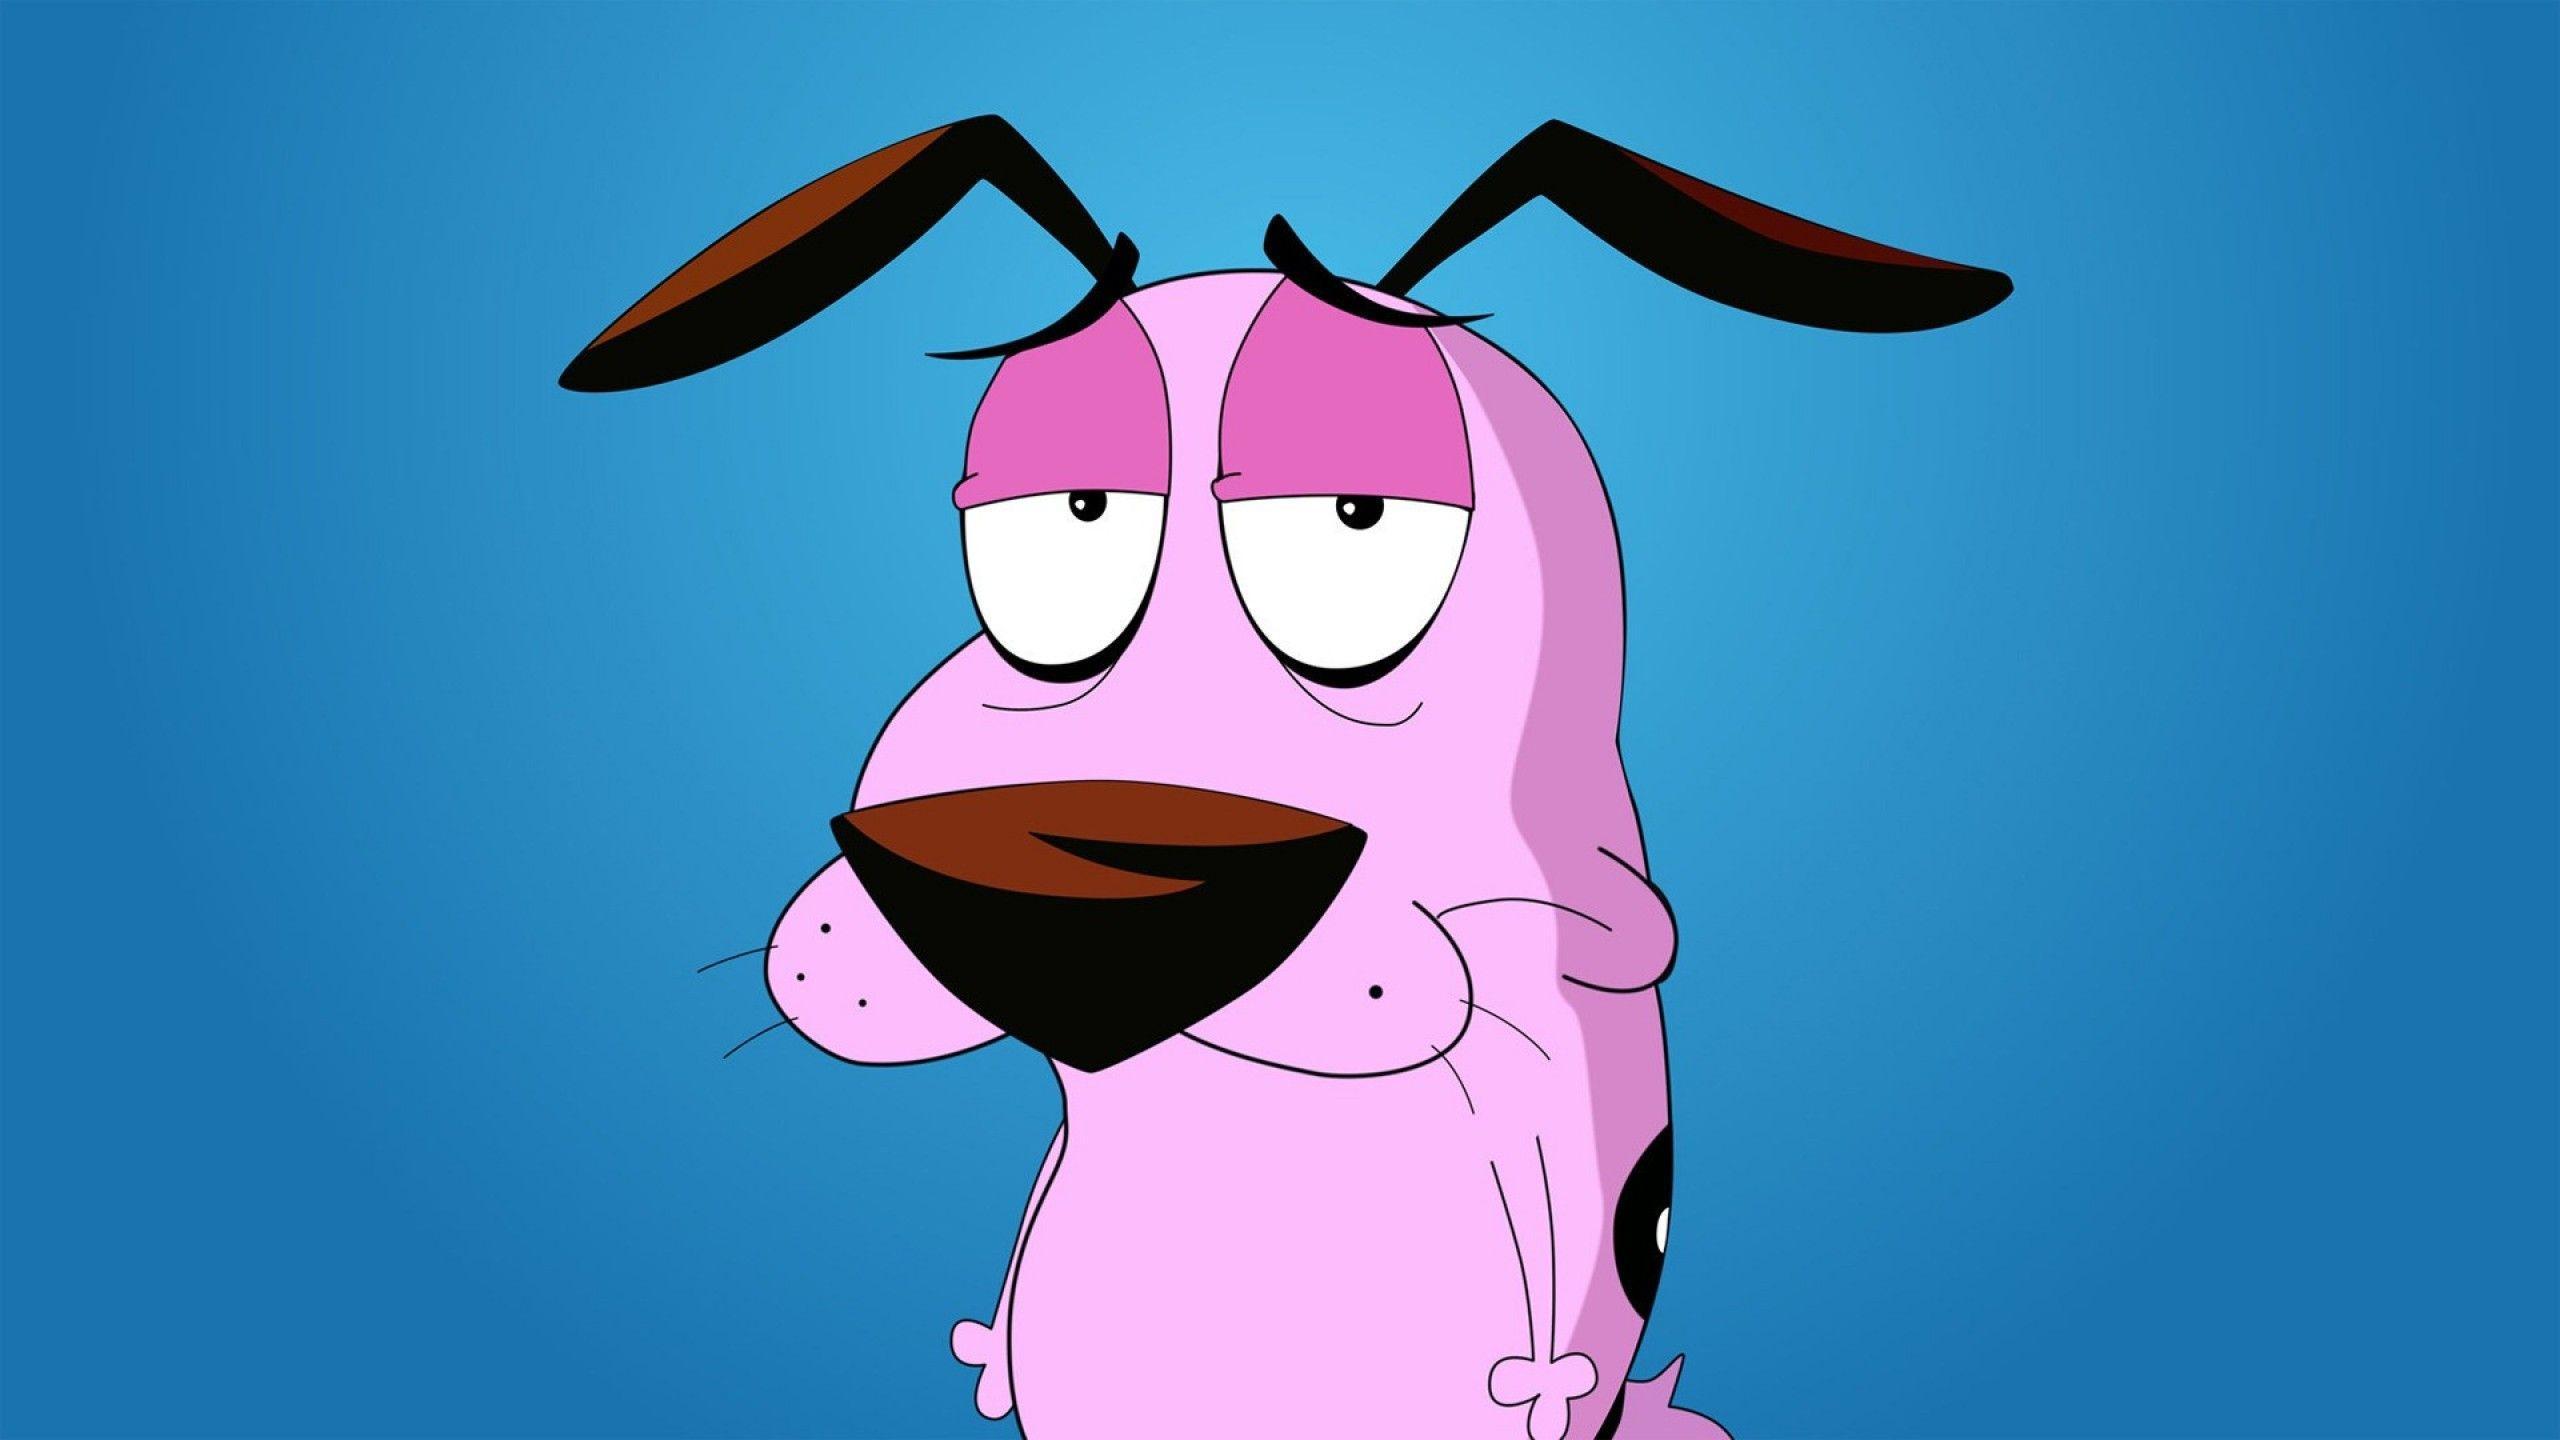 Cool Wallpaper Courage The Cowardly Dog Cartoons 2560x1440PX